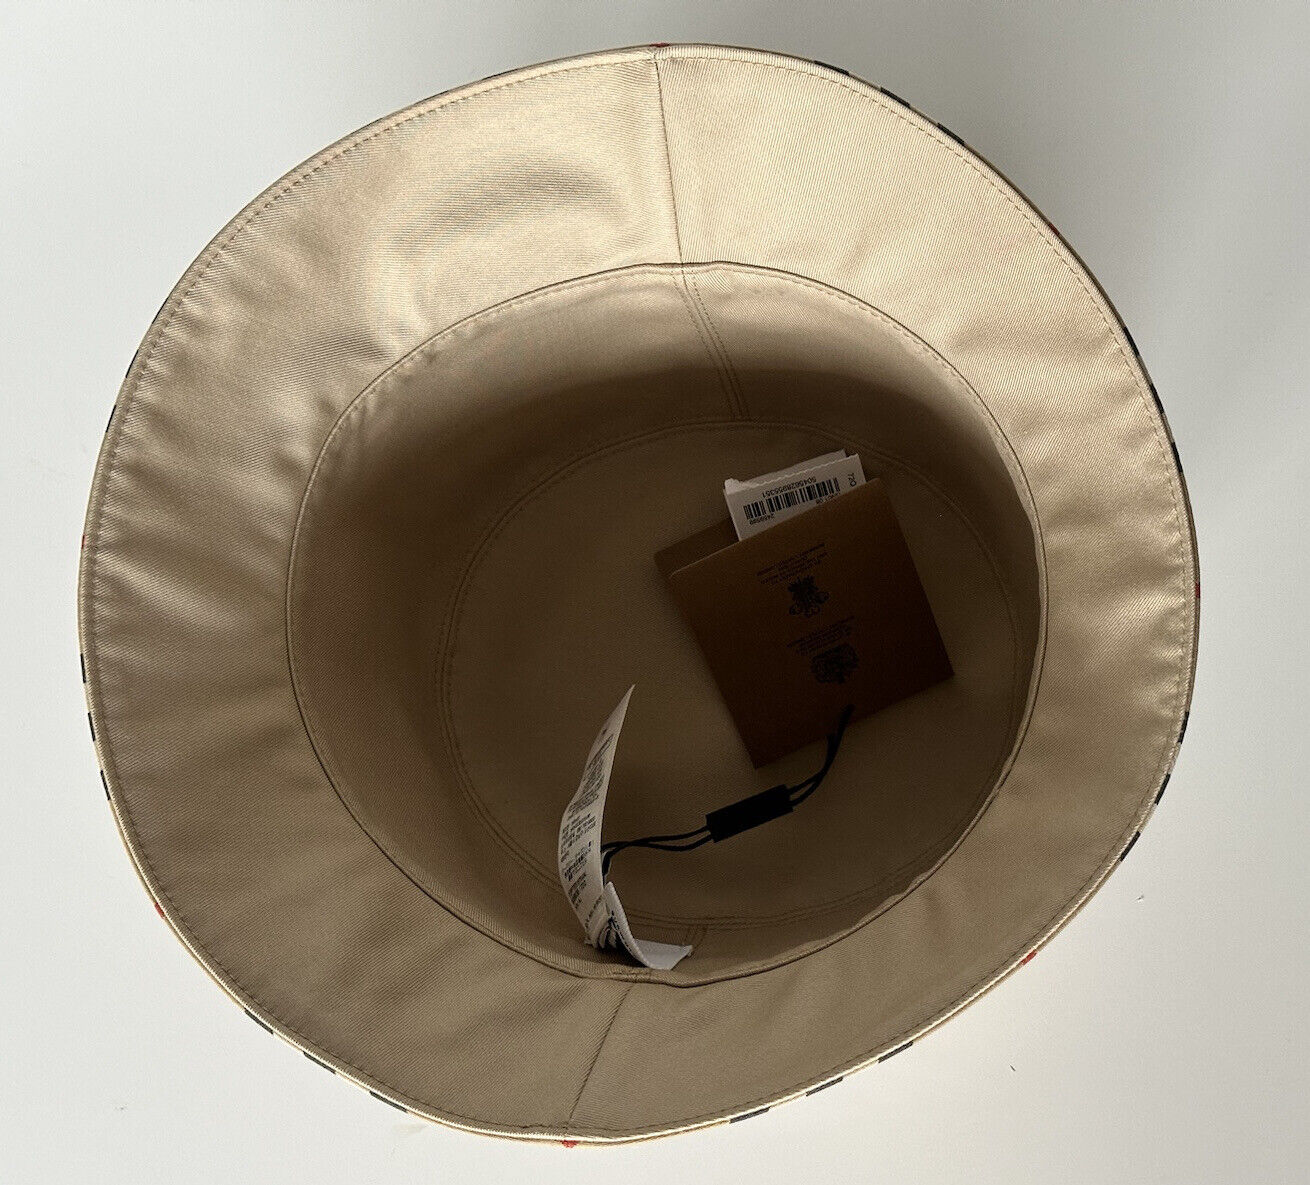 NWT $470 Burberry Check Bucket Hat Cotton Archive Beige L (59 cm) 8056638 Italy